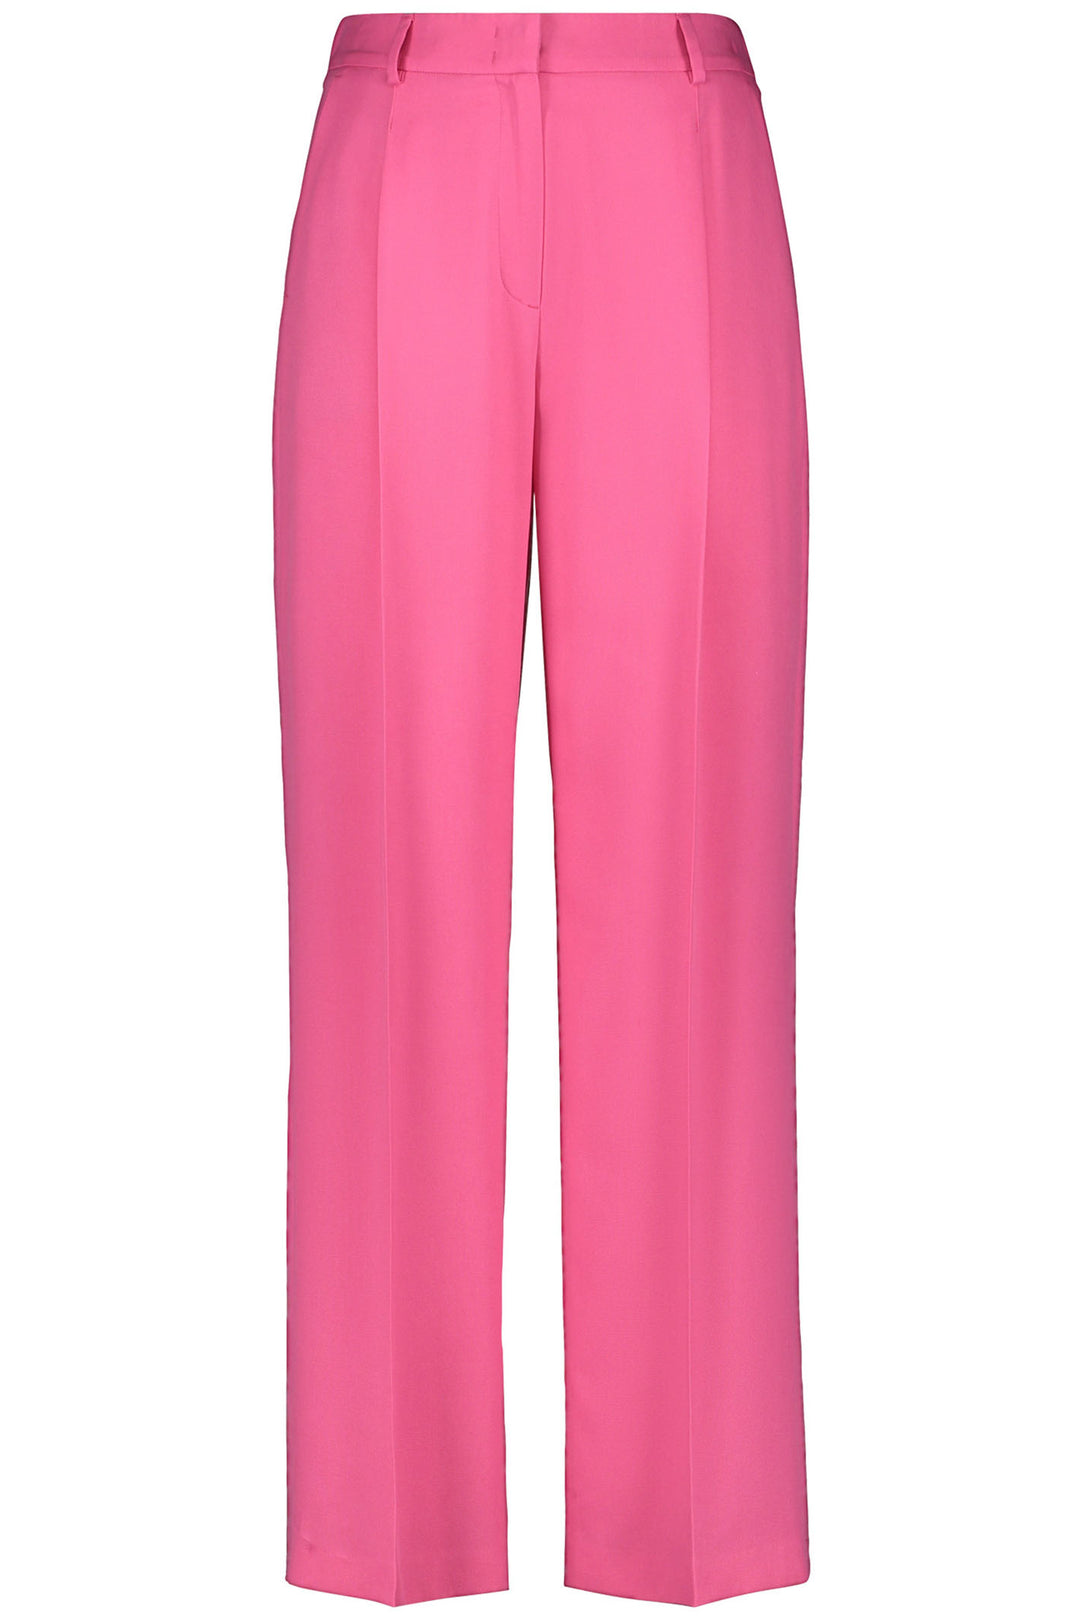 Gerry Weber 320021 Solar Pink Straight Leg Trousers - Experience Boutique